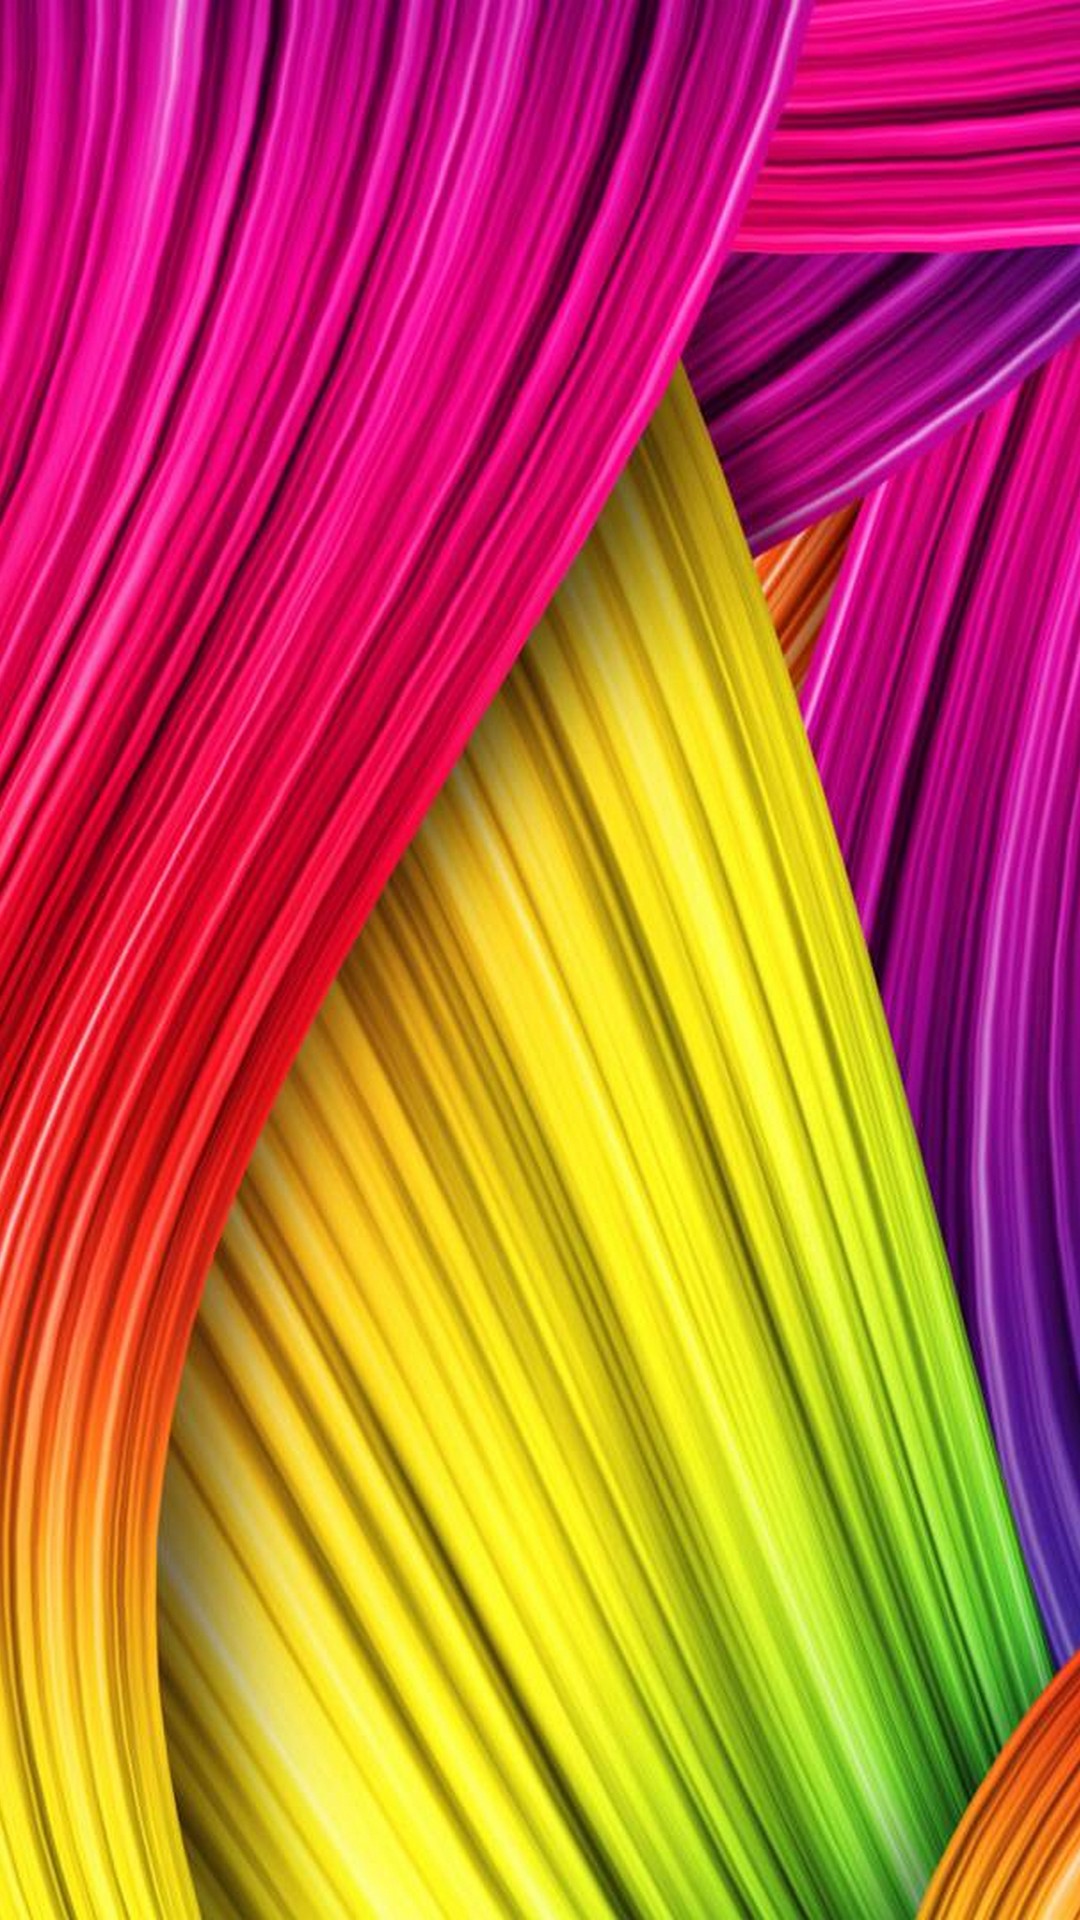 Light Colorful Wallpaper For Phone HD with high-resolution 1080x1920 pixel. Download all Mobile Wallpapers and Use them as wallpapers for your iPhone, Tablet, iPad, Android and other mobile devices